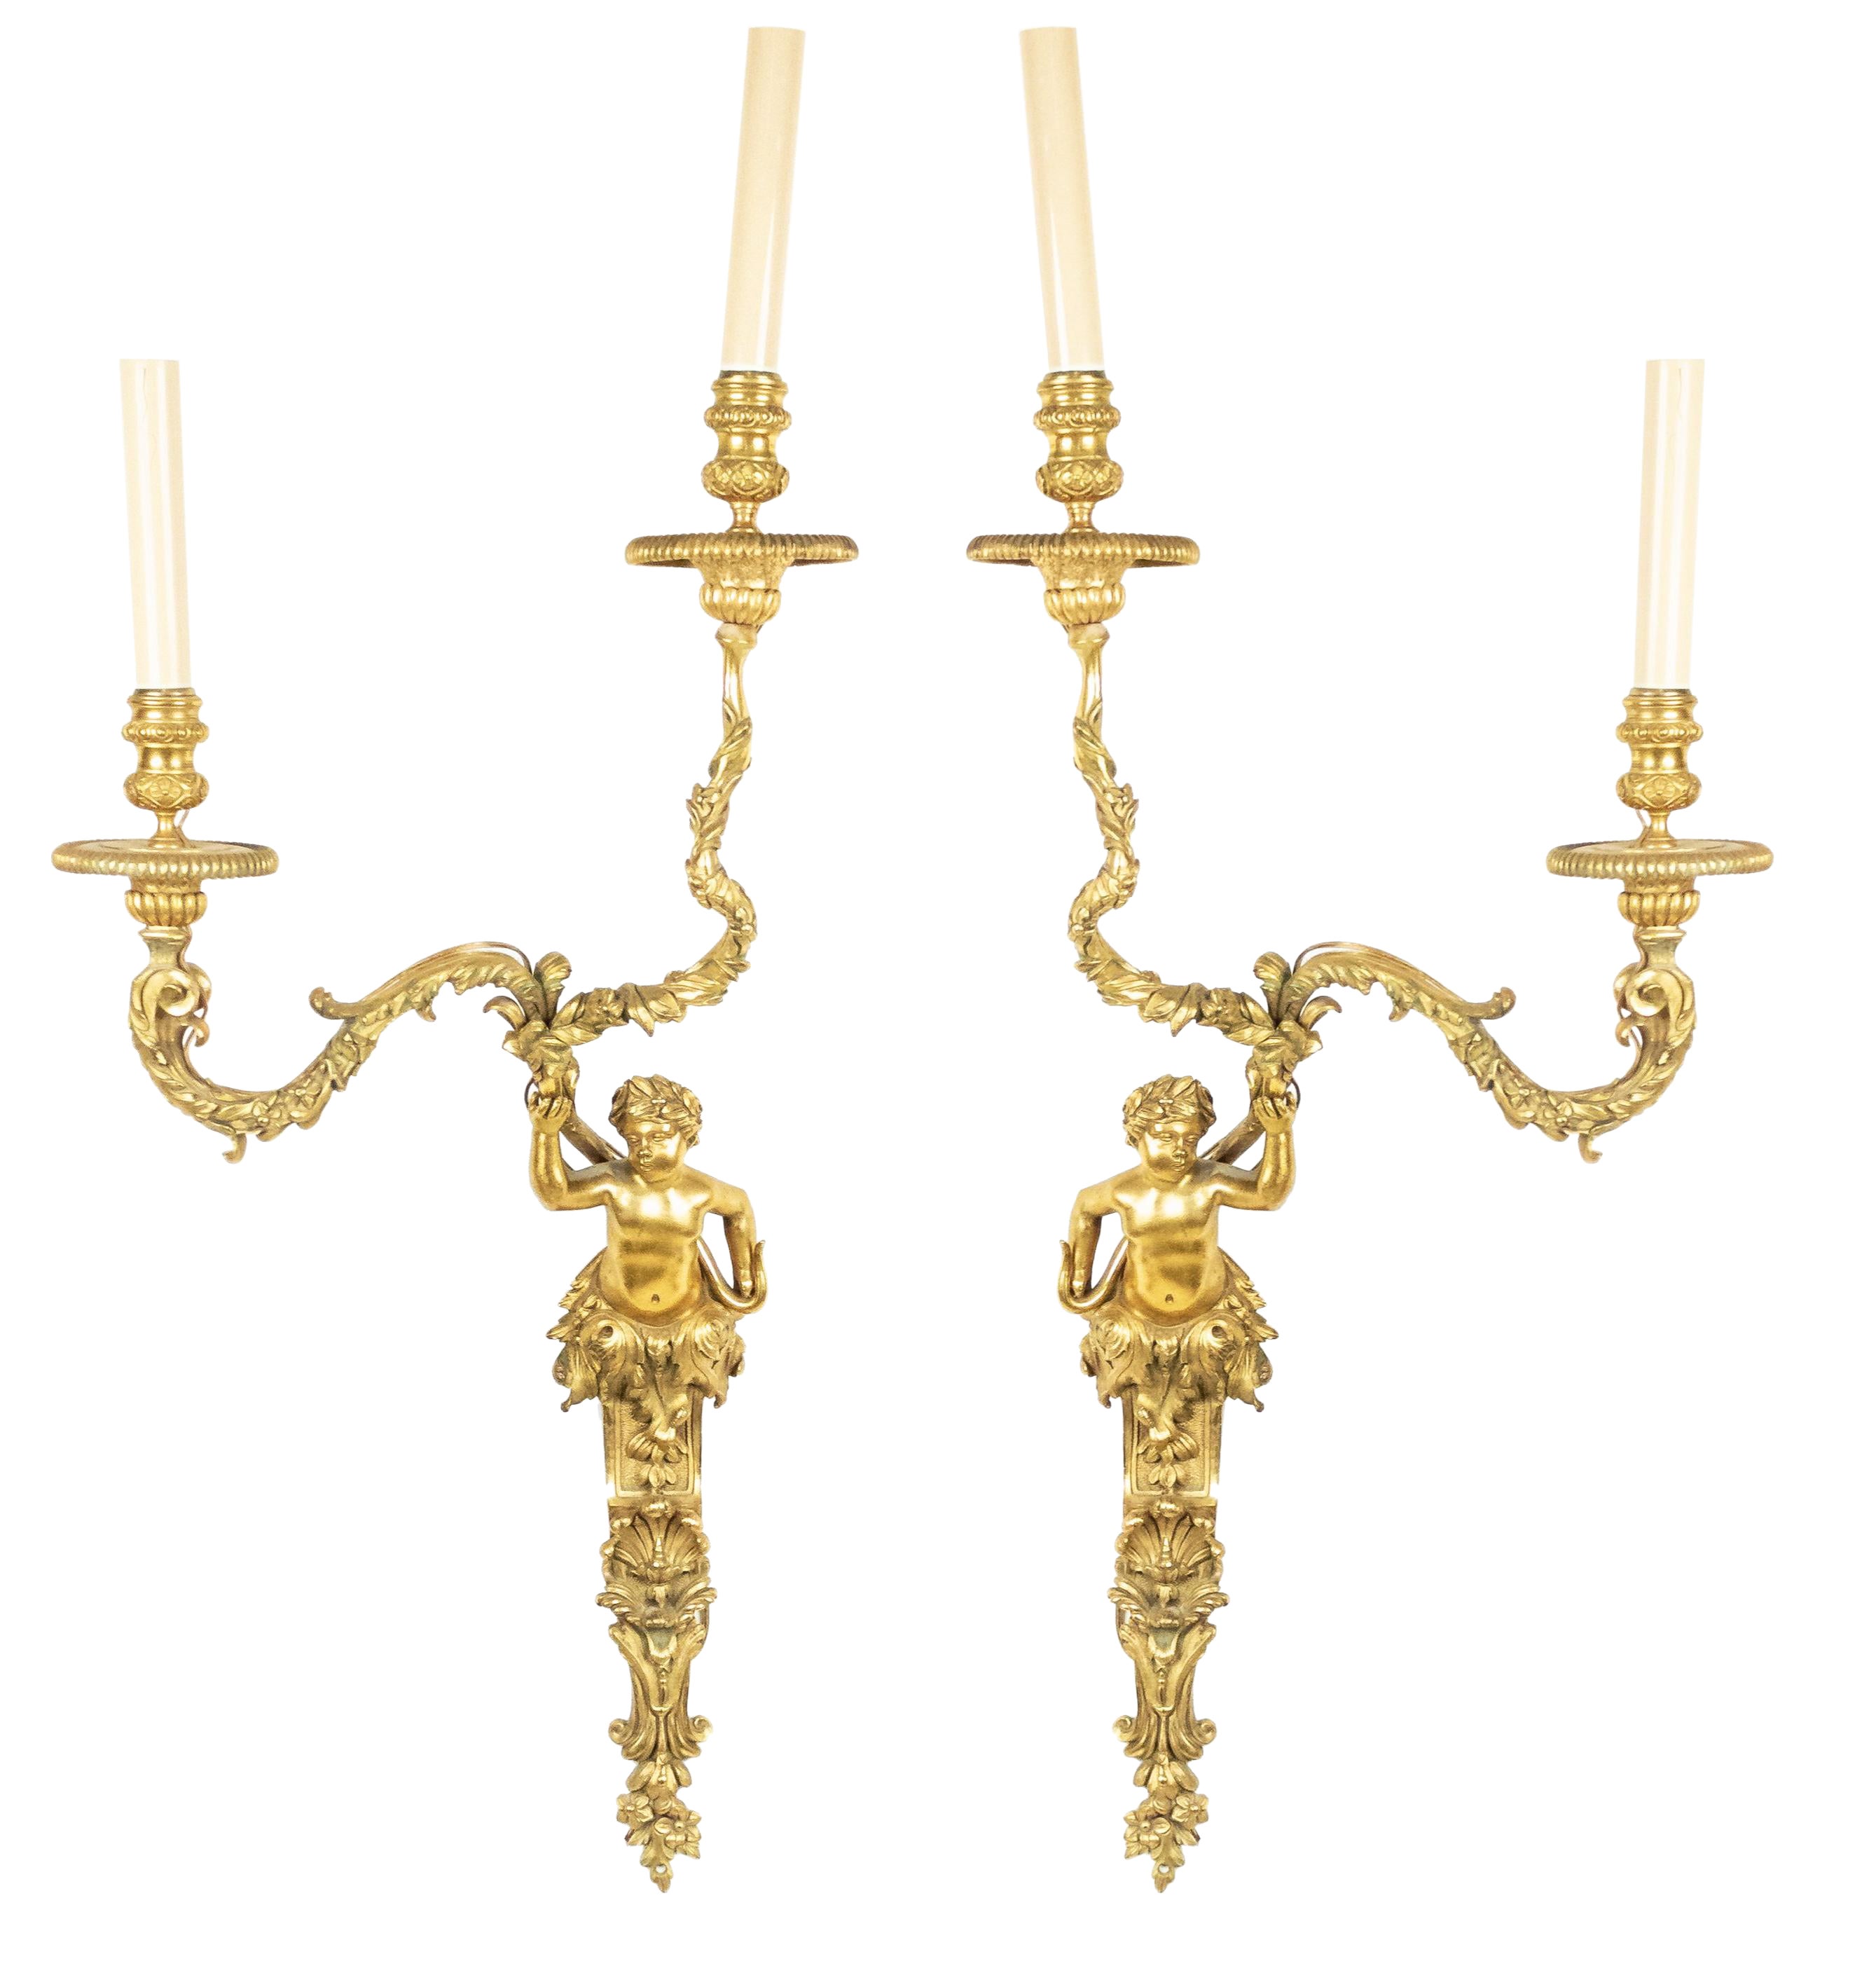 Pair of French Louis XV Style Bronze Dore Cherub Wall Sconces For Sale